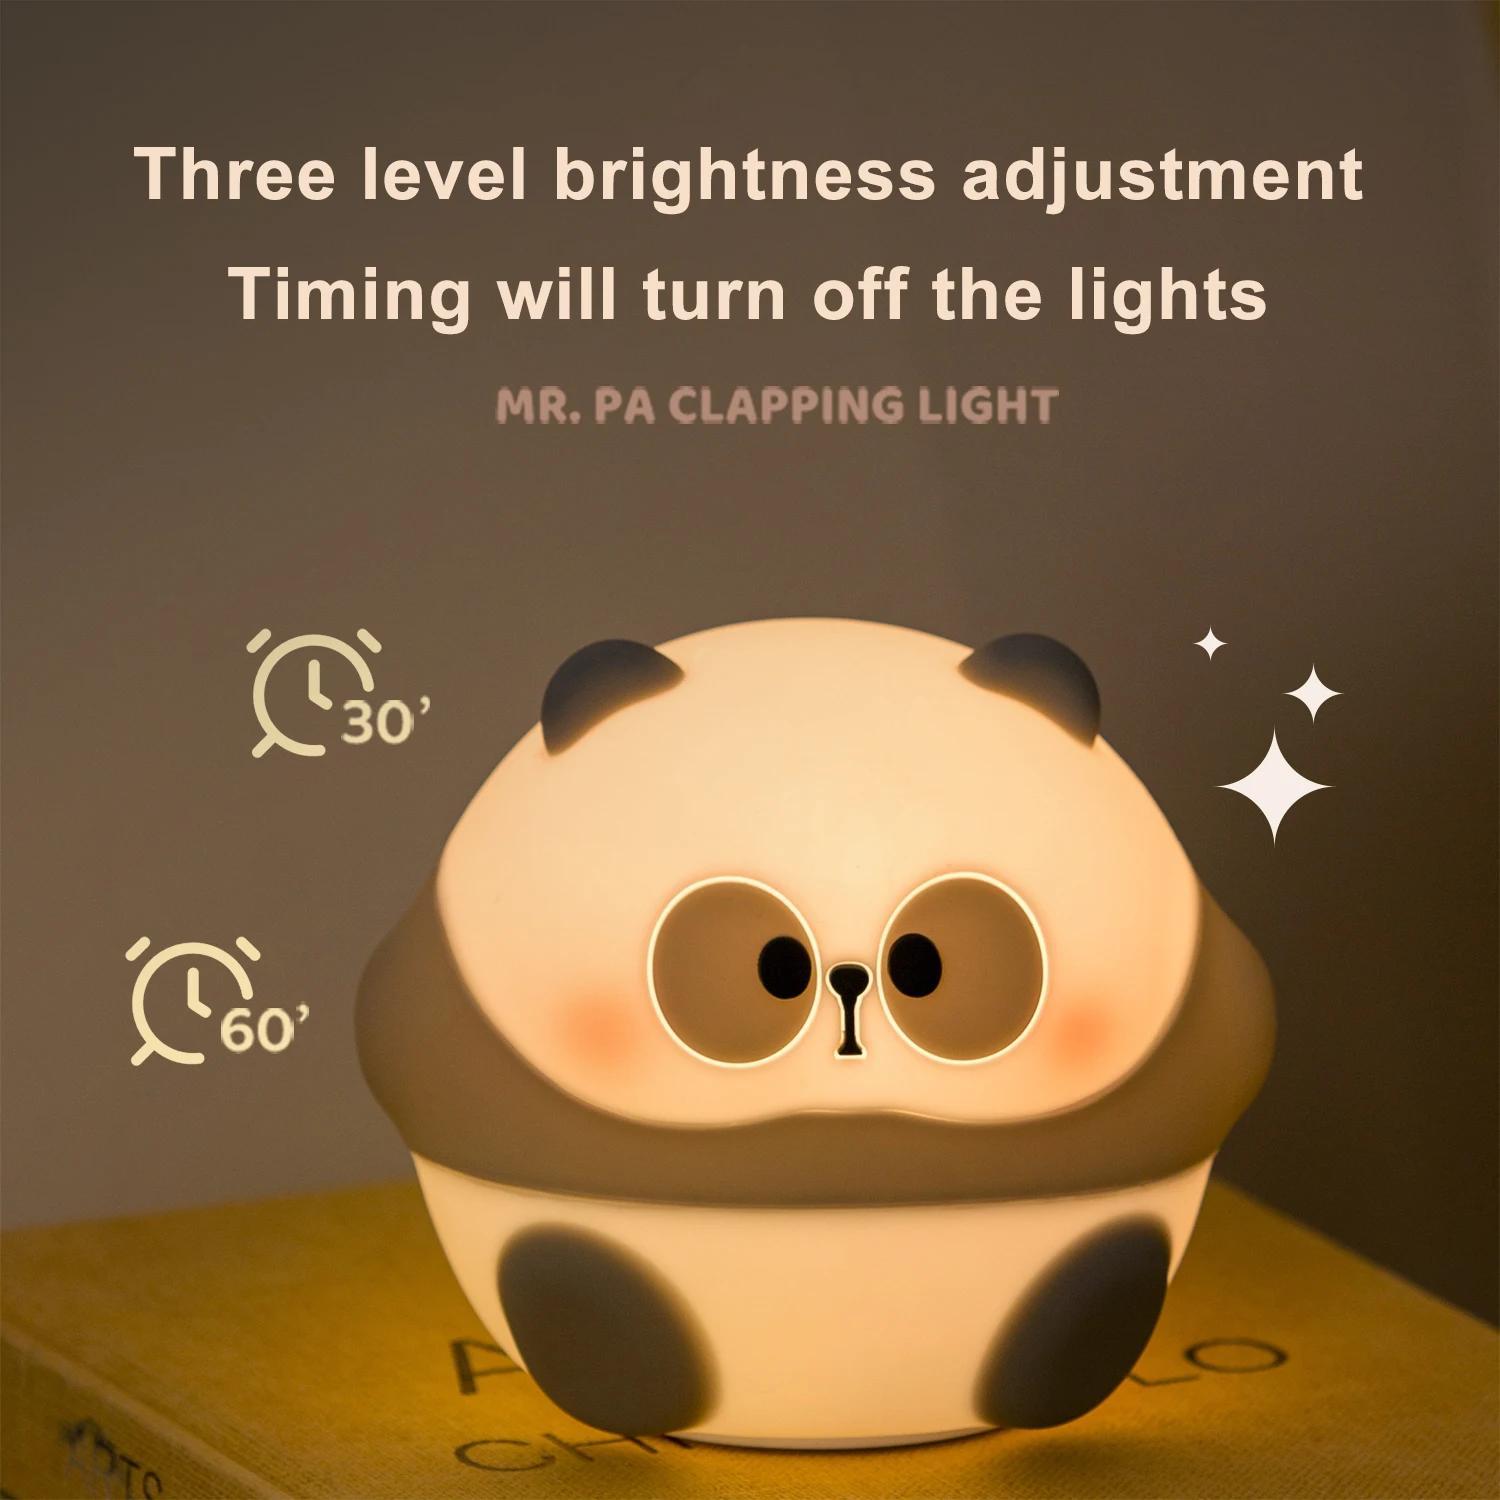 1pc LED Night Light, Cute Panda Cartoon Animals Silicone Lamp, USB Rechargeable Timing Sleeping Lamp, Creative Bedroom Bedside Lamp, For Home Decoration Festival/Birthday Gifts details 0